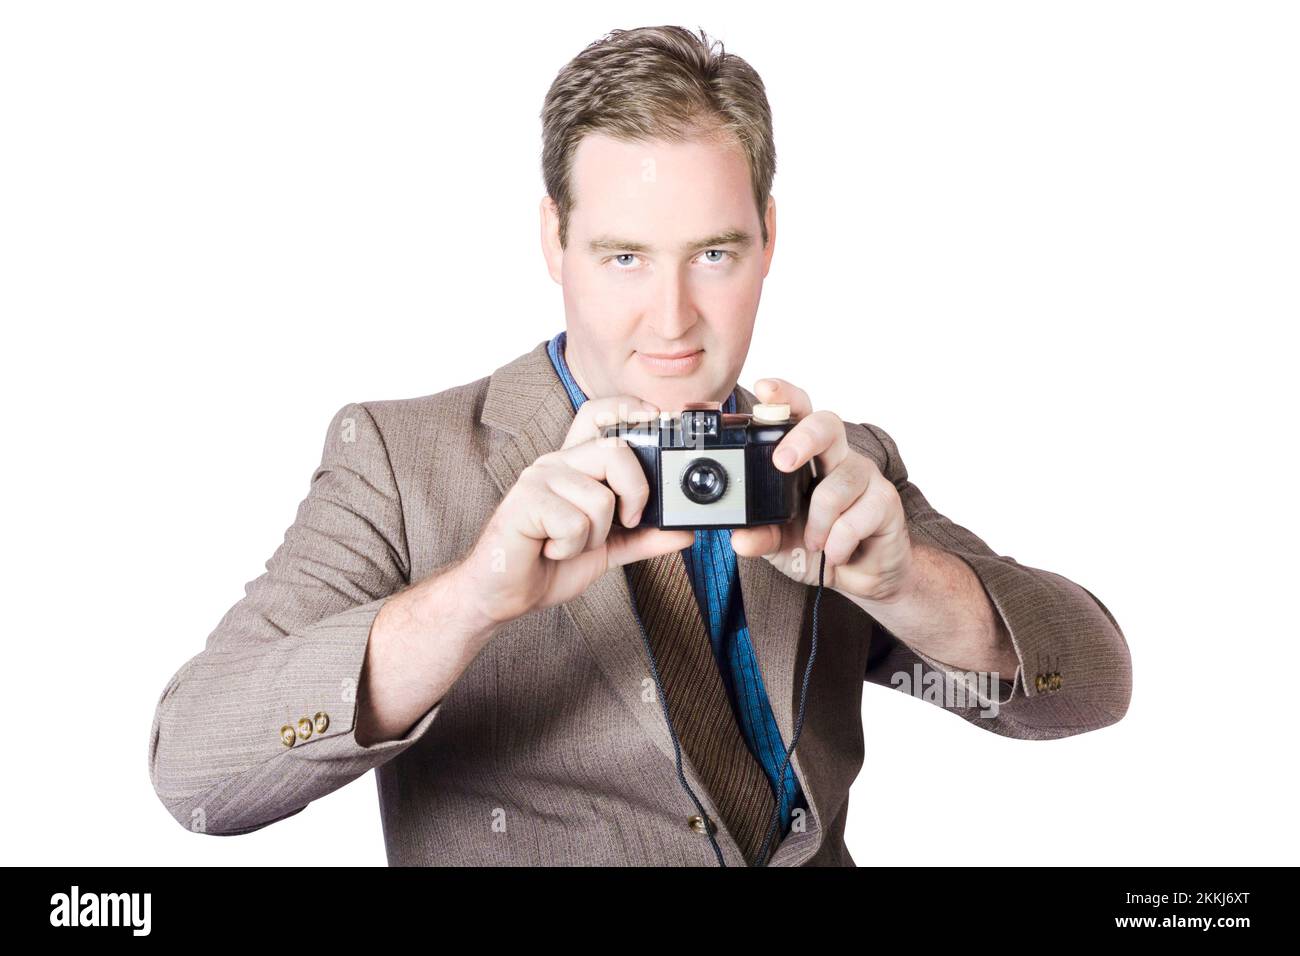 Isolated image of a man taking picture with 1950s film camera over white background. Fifties crime scene photographer Stock Photo